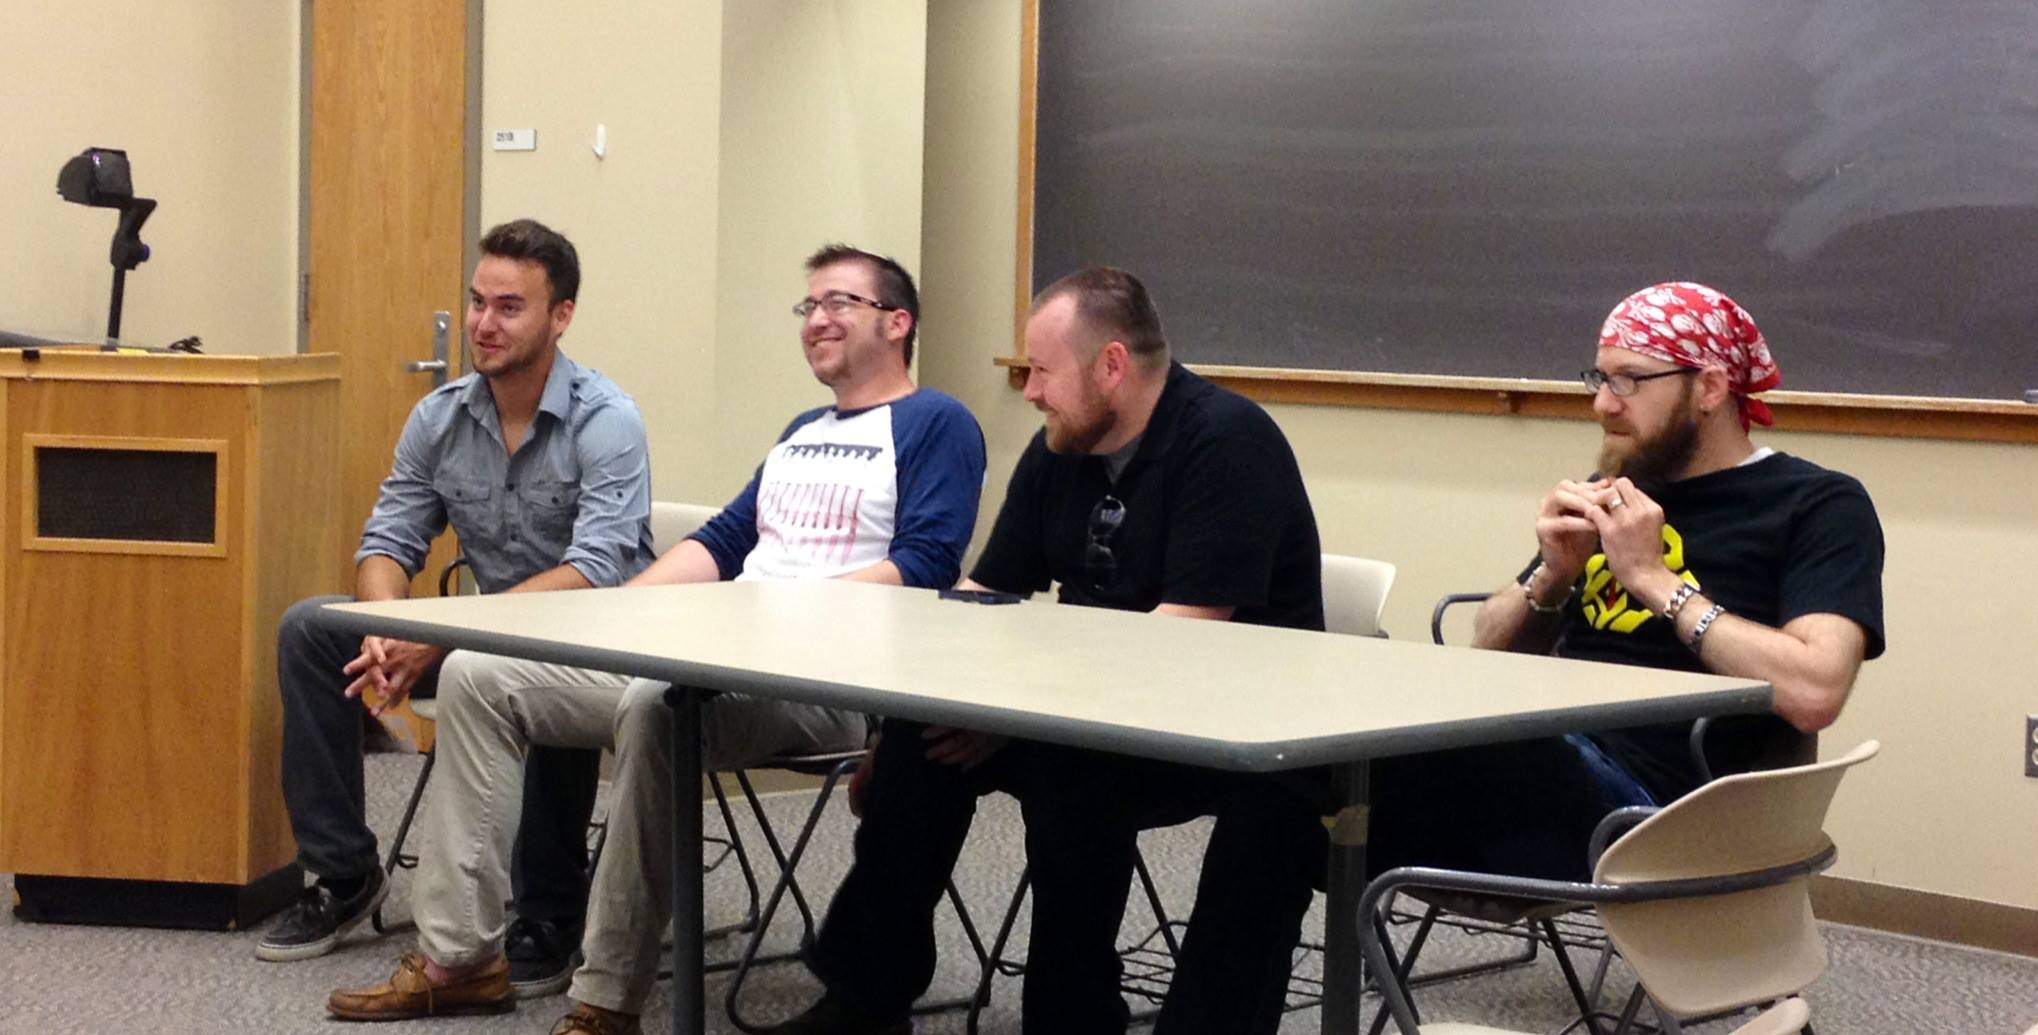 On a directing panel at the 2013 Indie FIlm Con alongside Andrew Bennett, Zack Parker from Along the Tracks Inc, and Jakob Bilinski from Cinephreak Films.